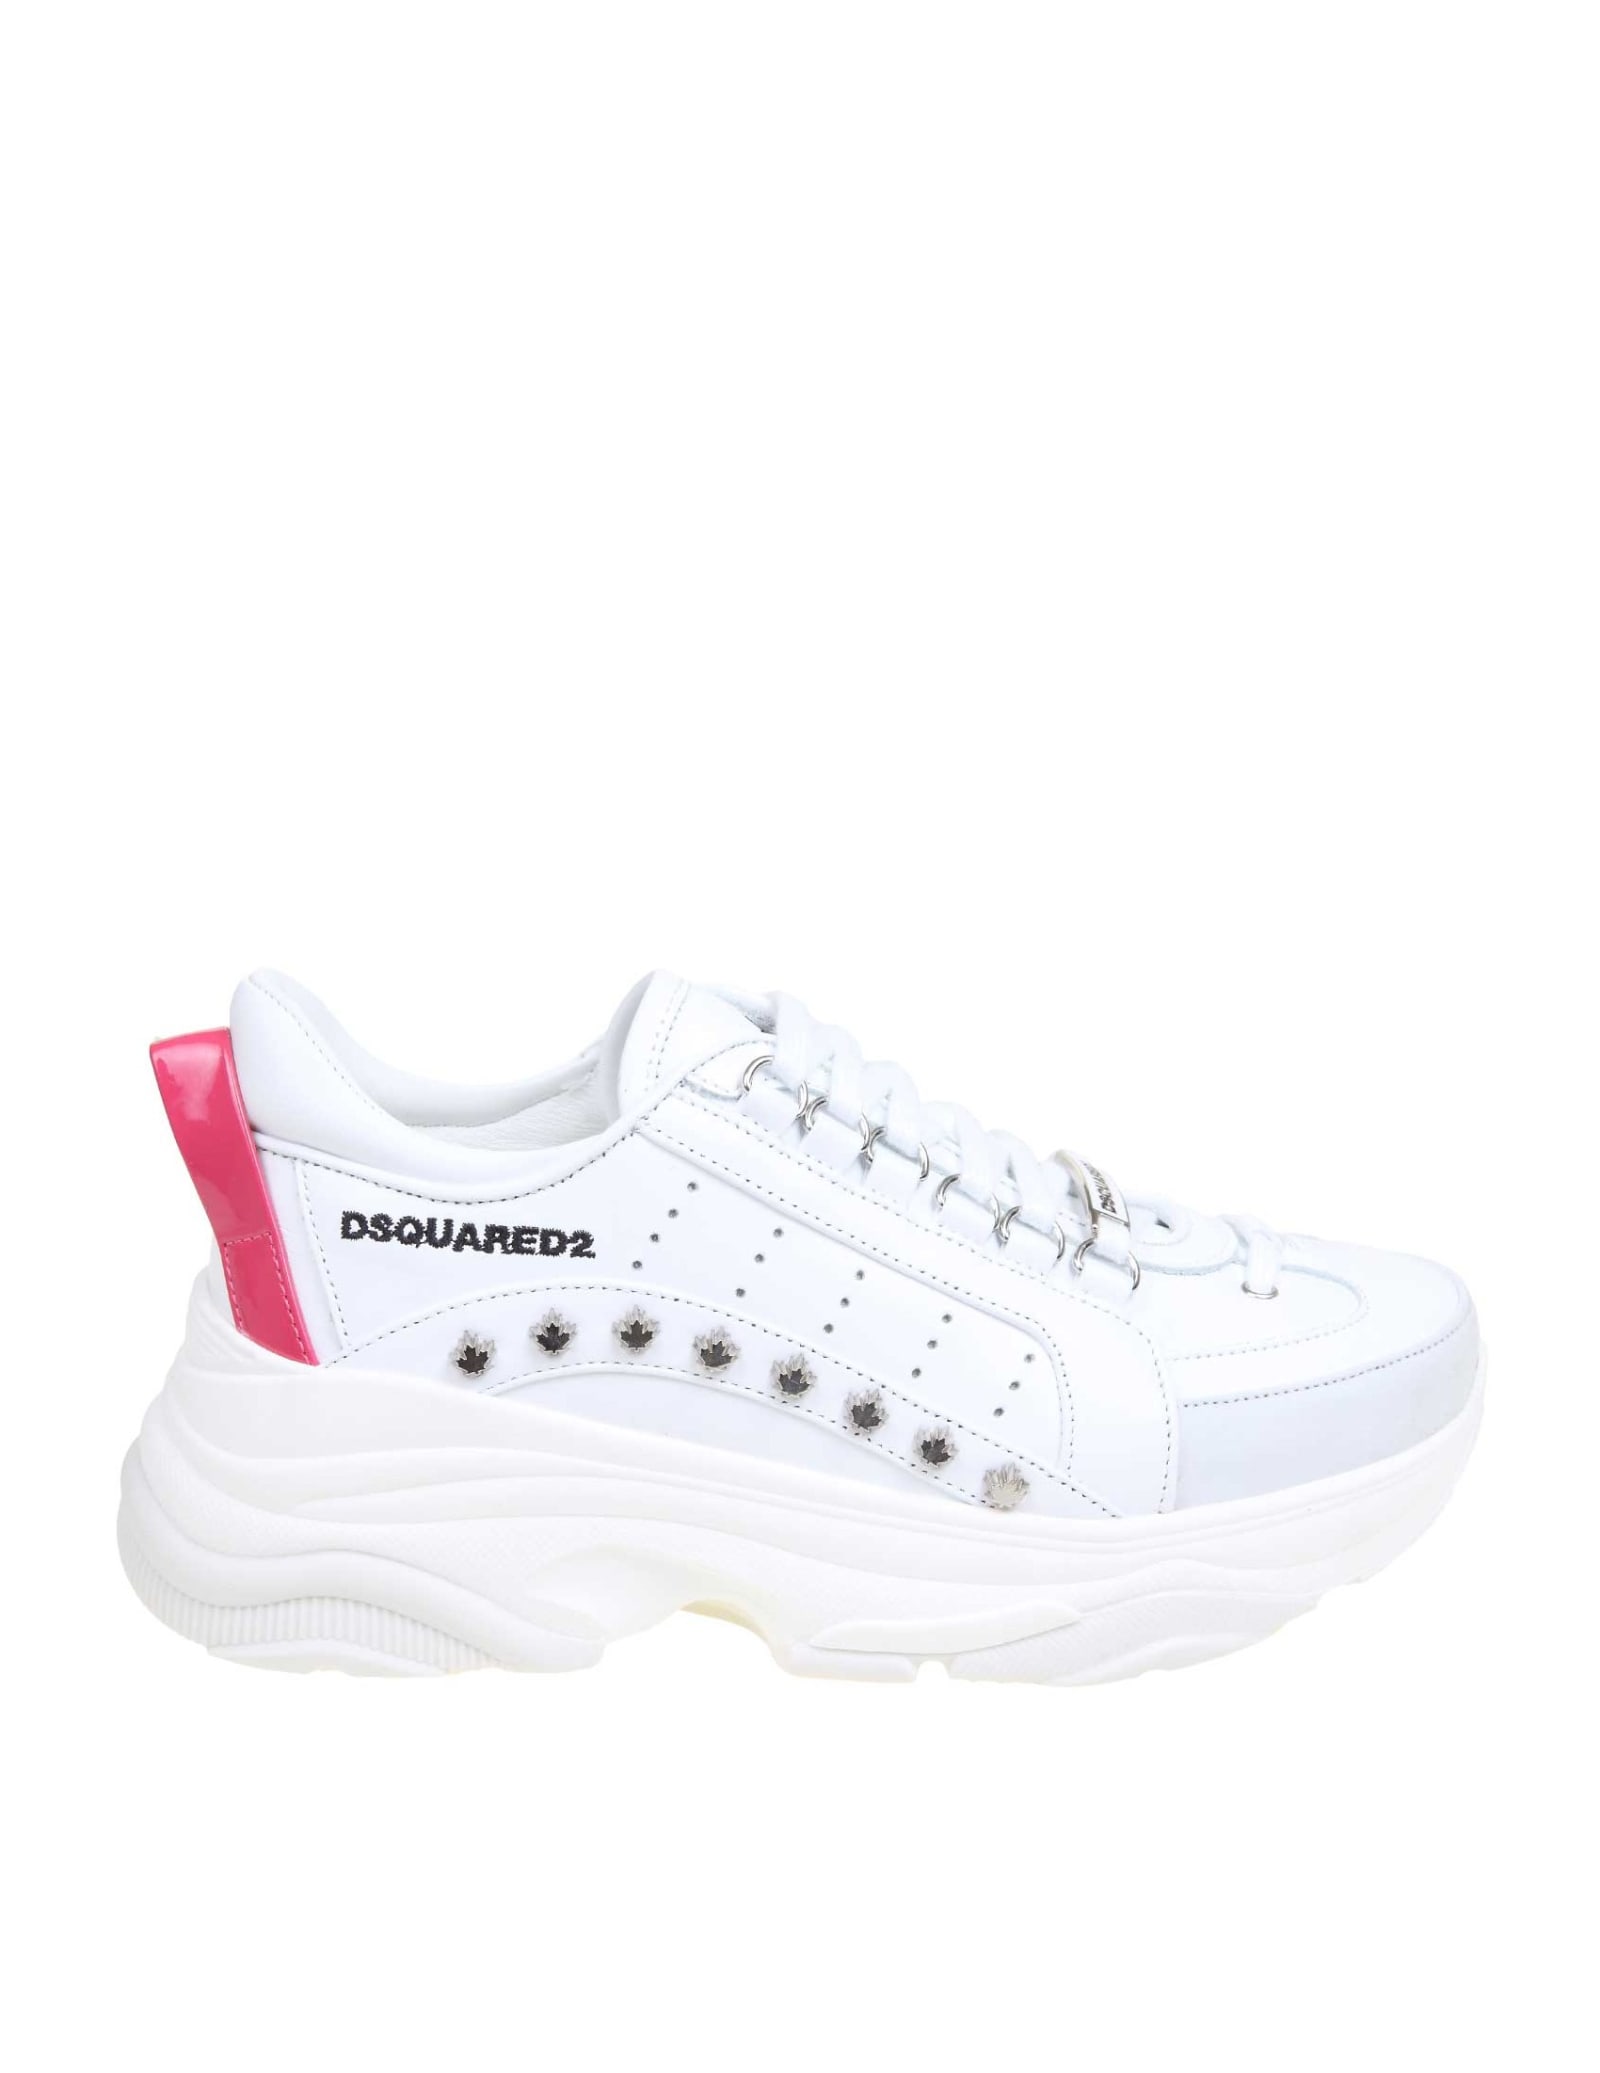 DSQUARED2 DSQUARED trainers BUMPY 551 IN WHITE LEATHER,11234137